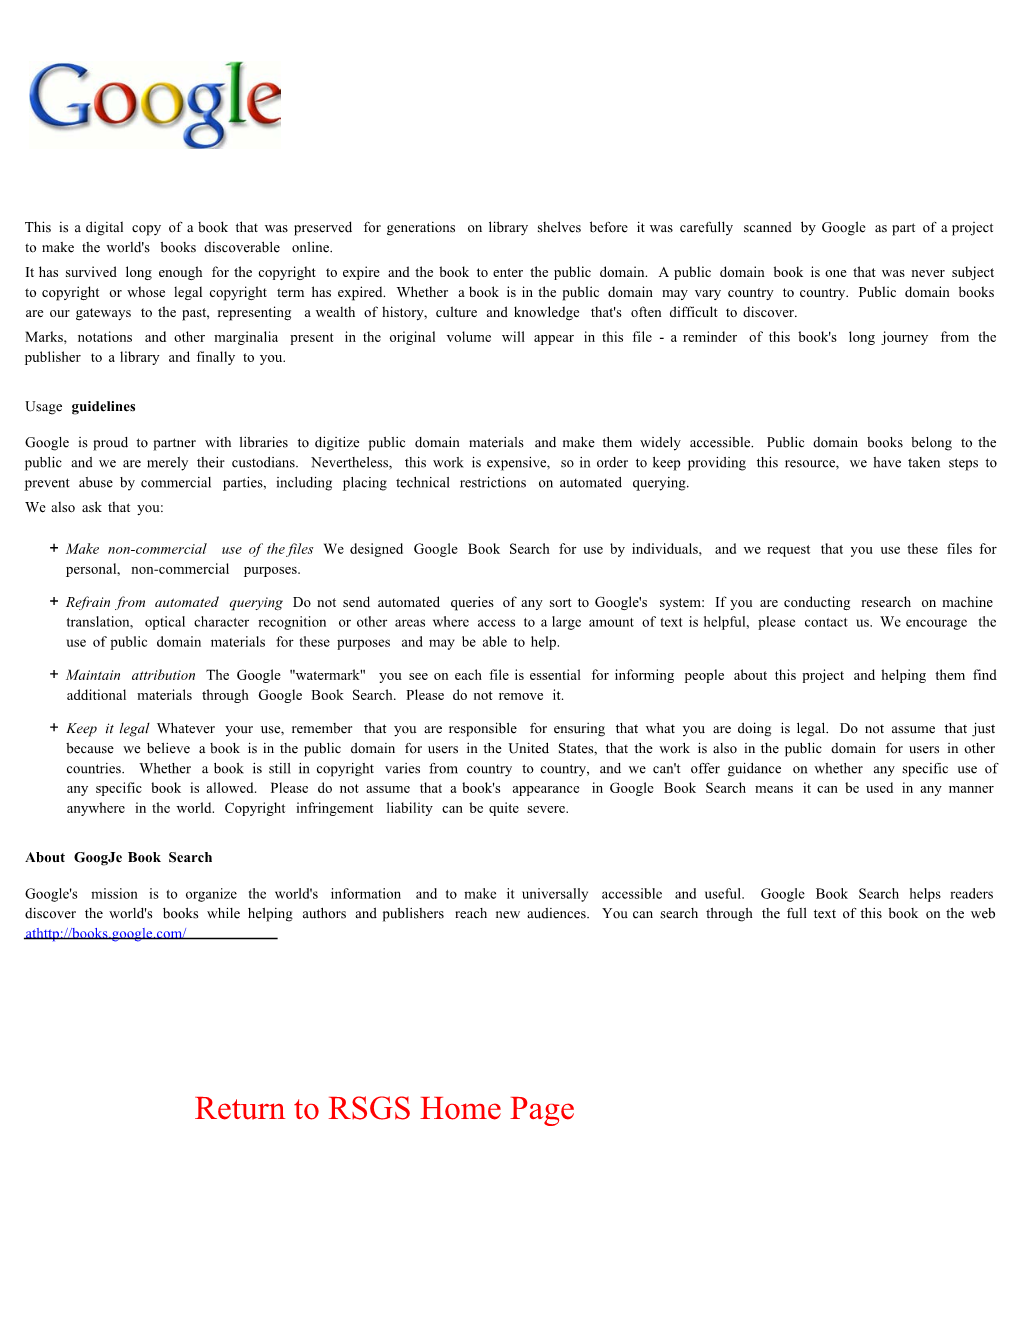 RSGS Home Page